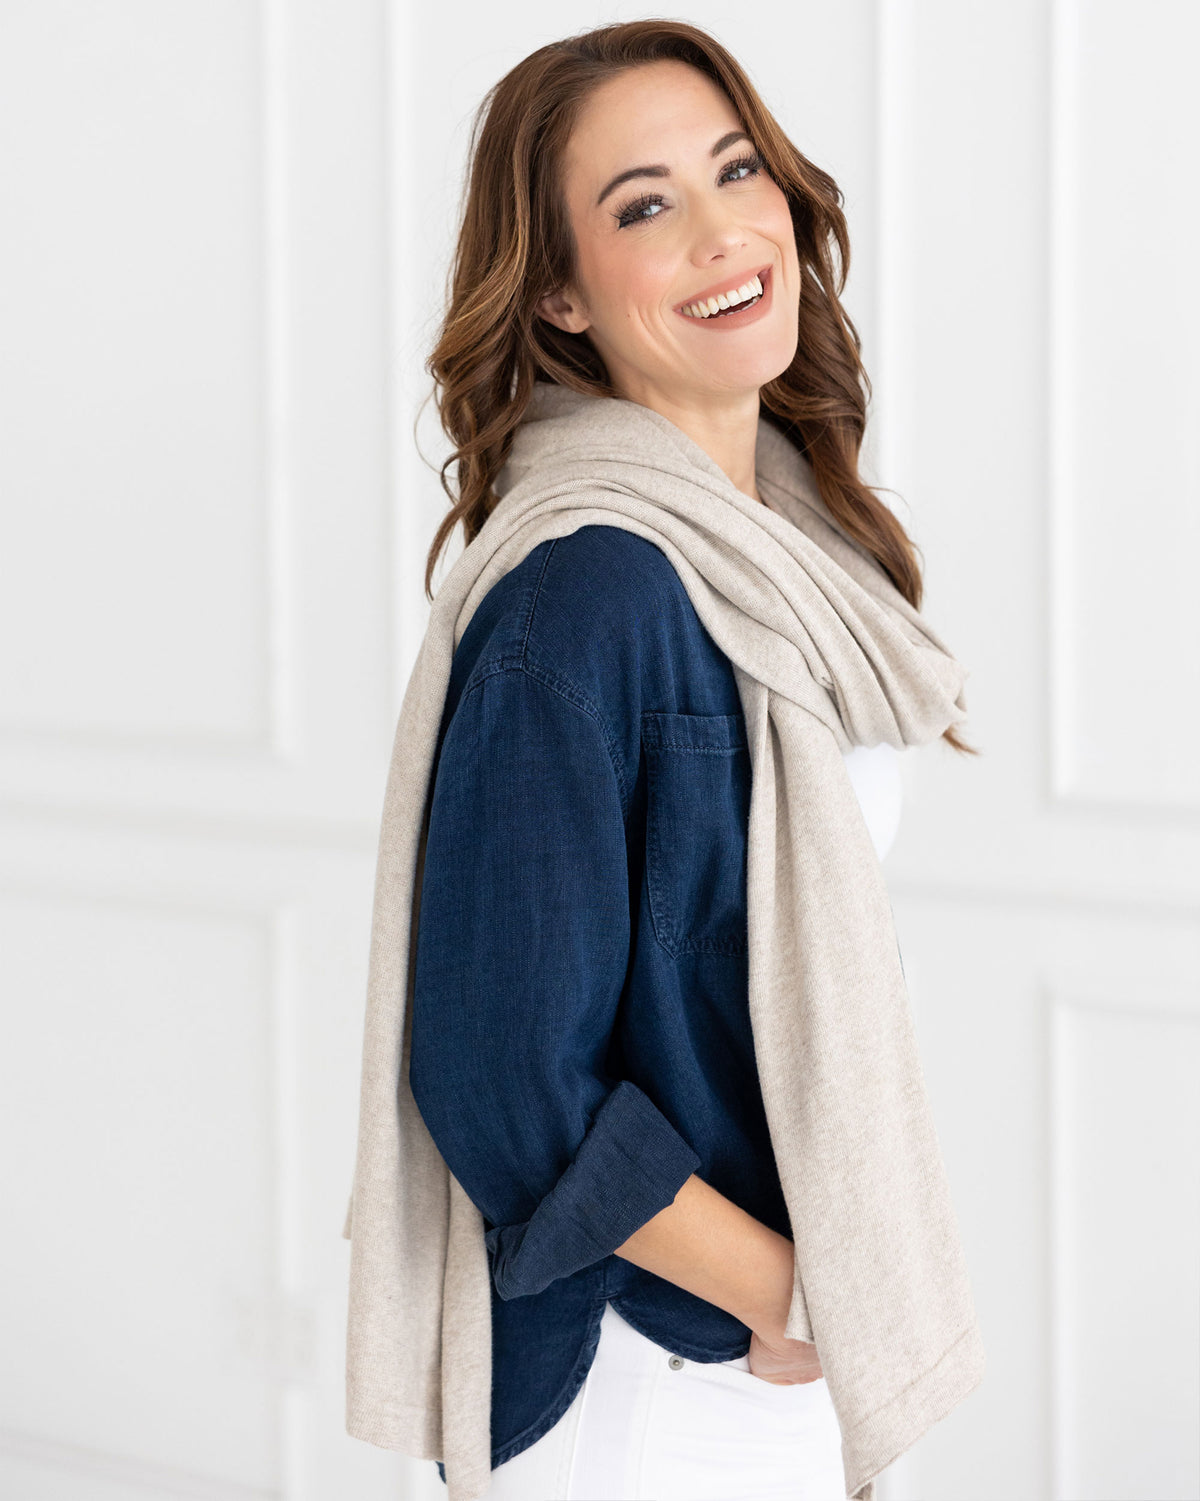 Woman wearing the Dreamsoft Travel Scarf in Birch Scarf which is a cream scarf, while smiling